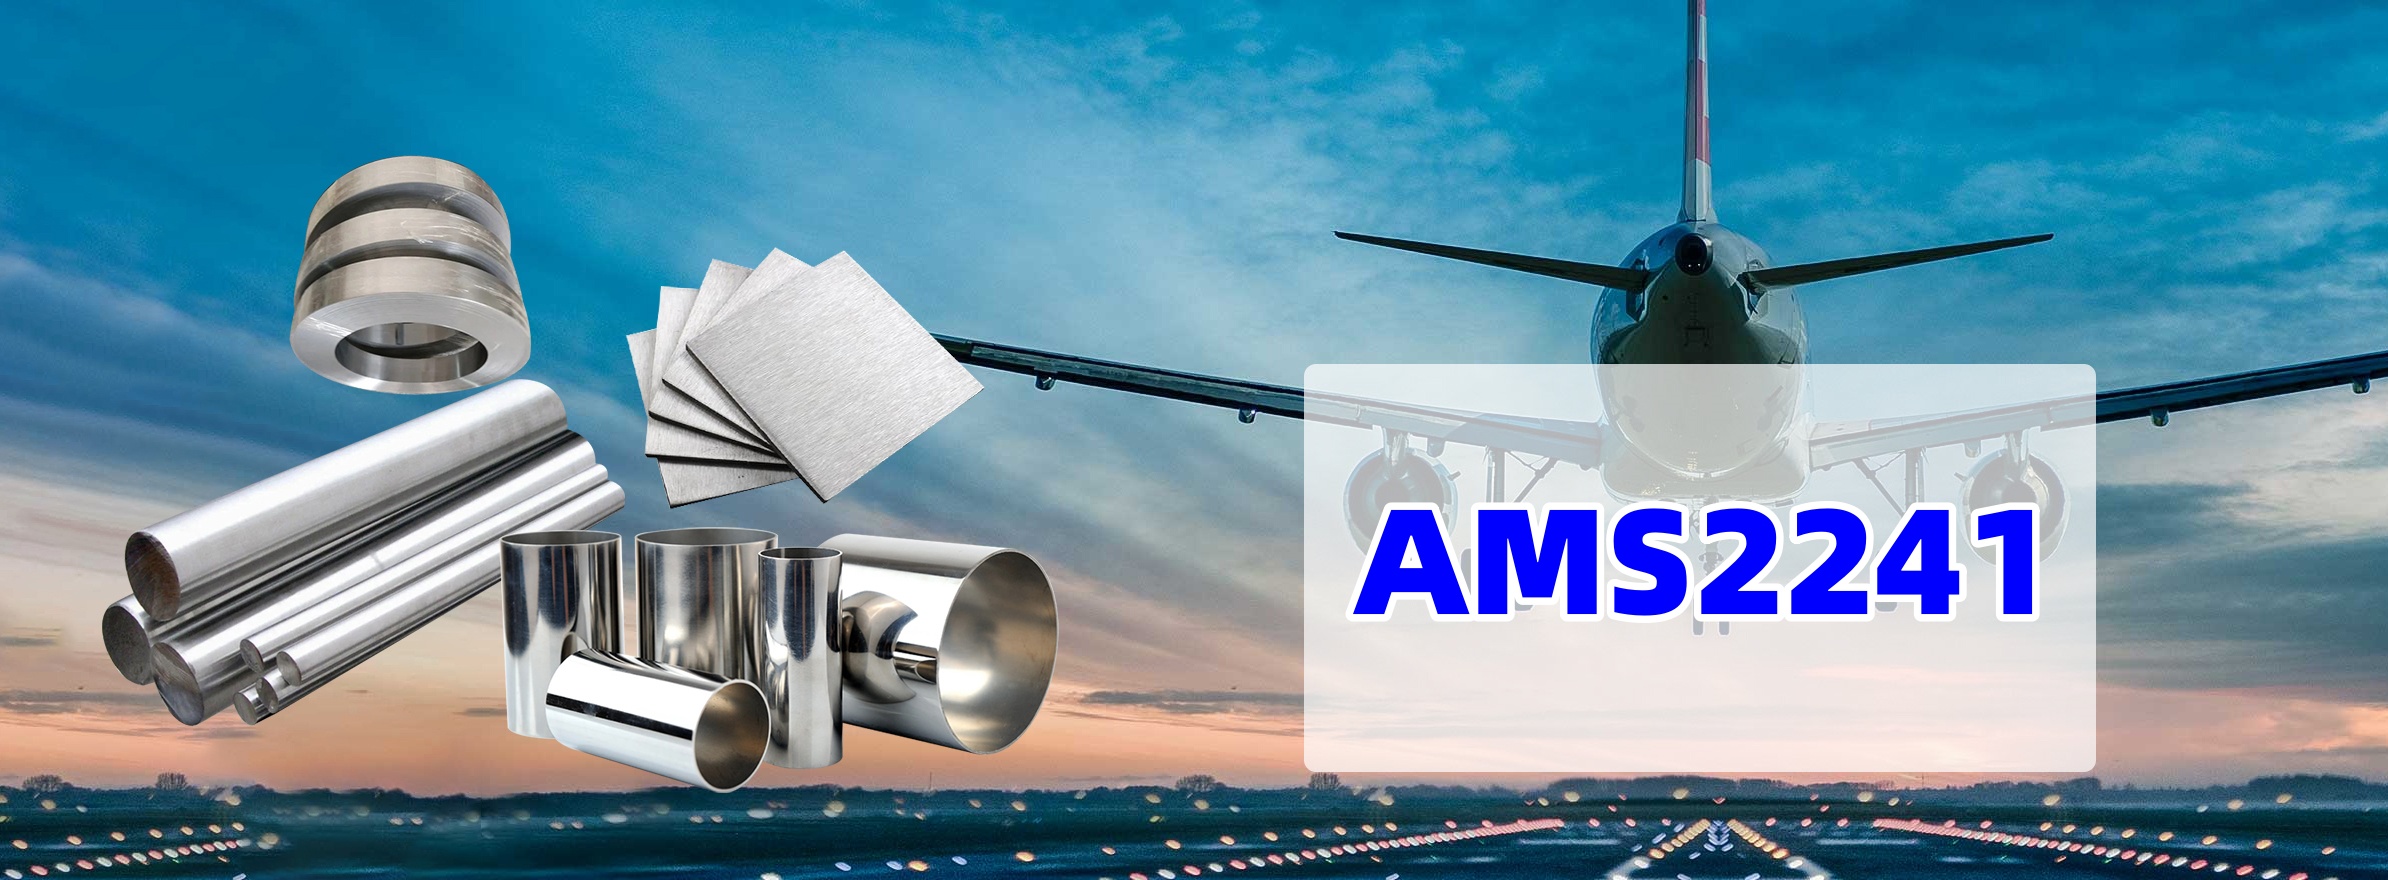 What is AMS2241?